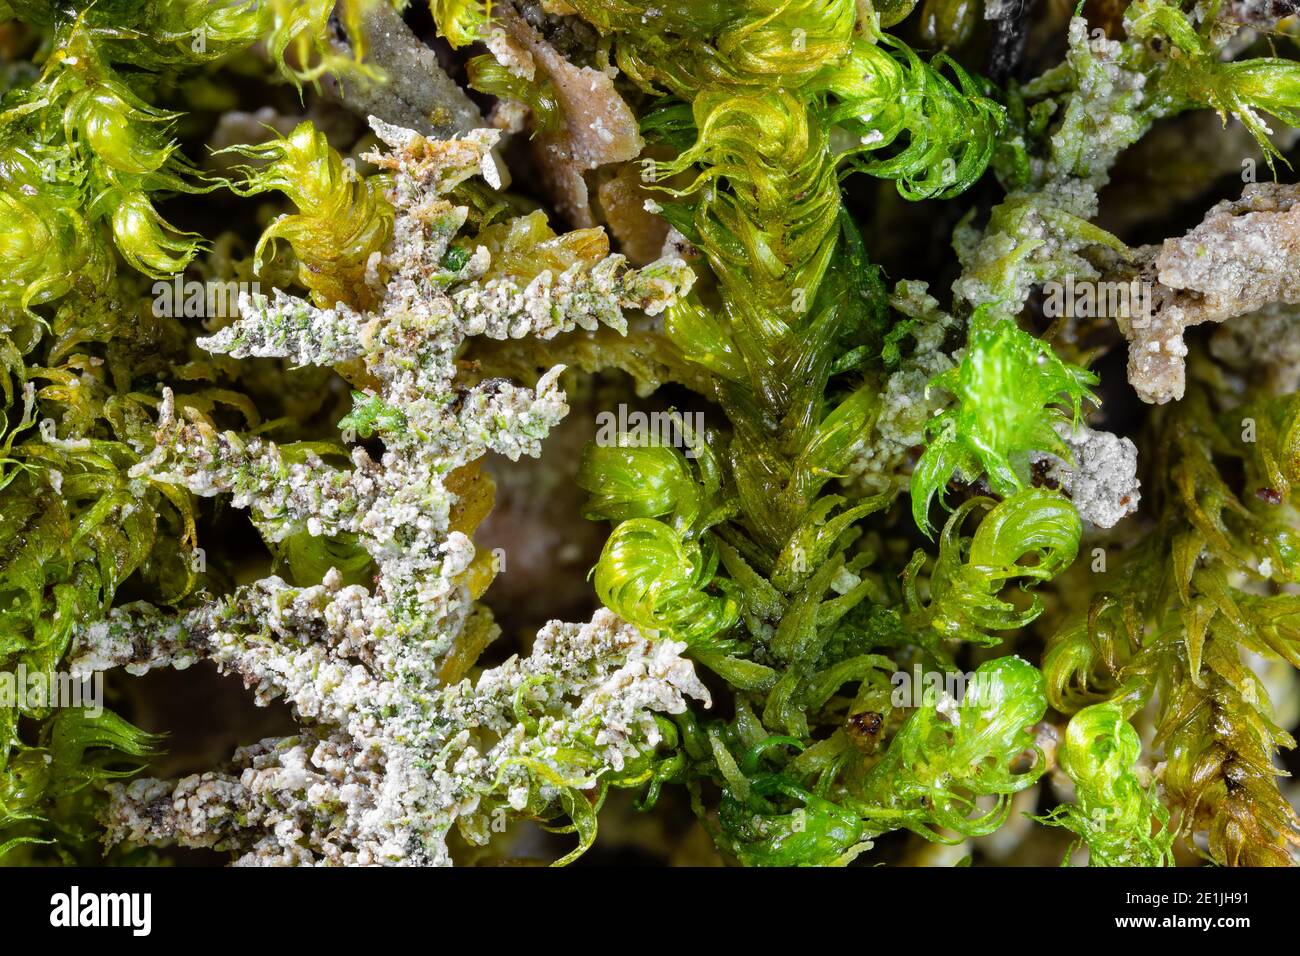 Closeup of moss plants covered by calcareous sinter from the spring of the Hase near Dissen in Germany Stock Photo